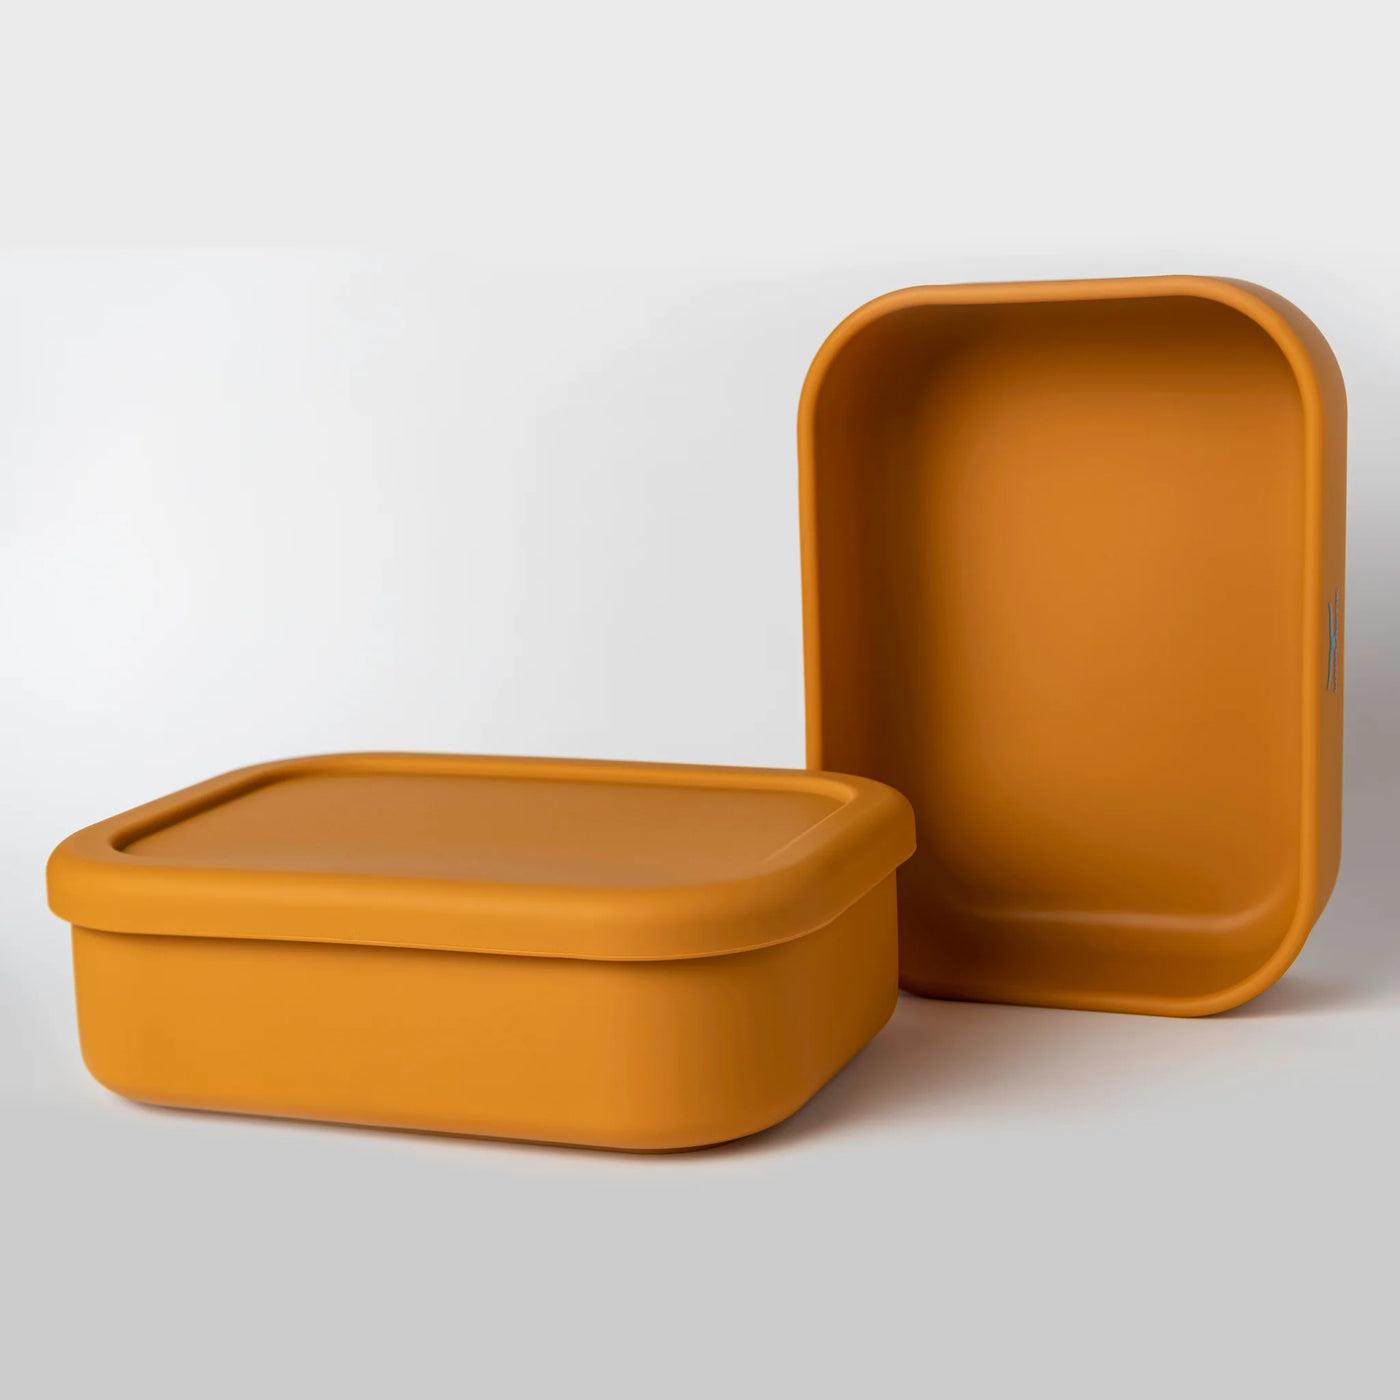 Silicone Reusable Rectangle with No Compartments Lunch Boxes (Bulk)